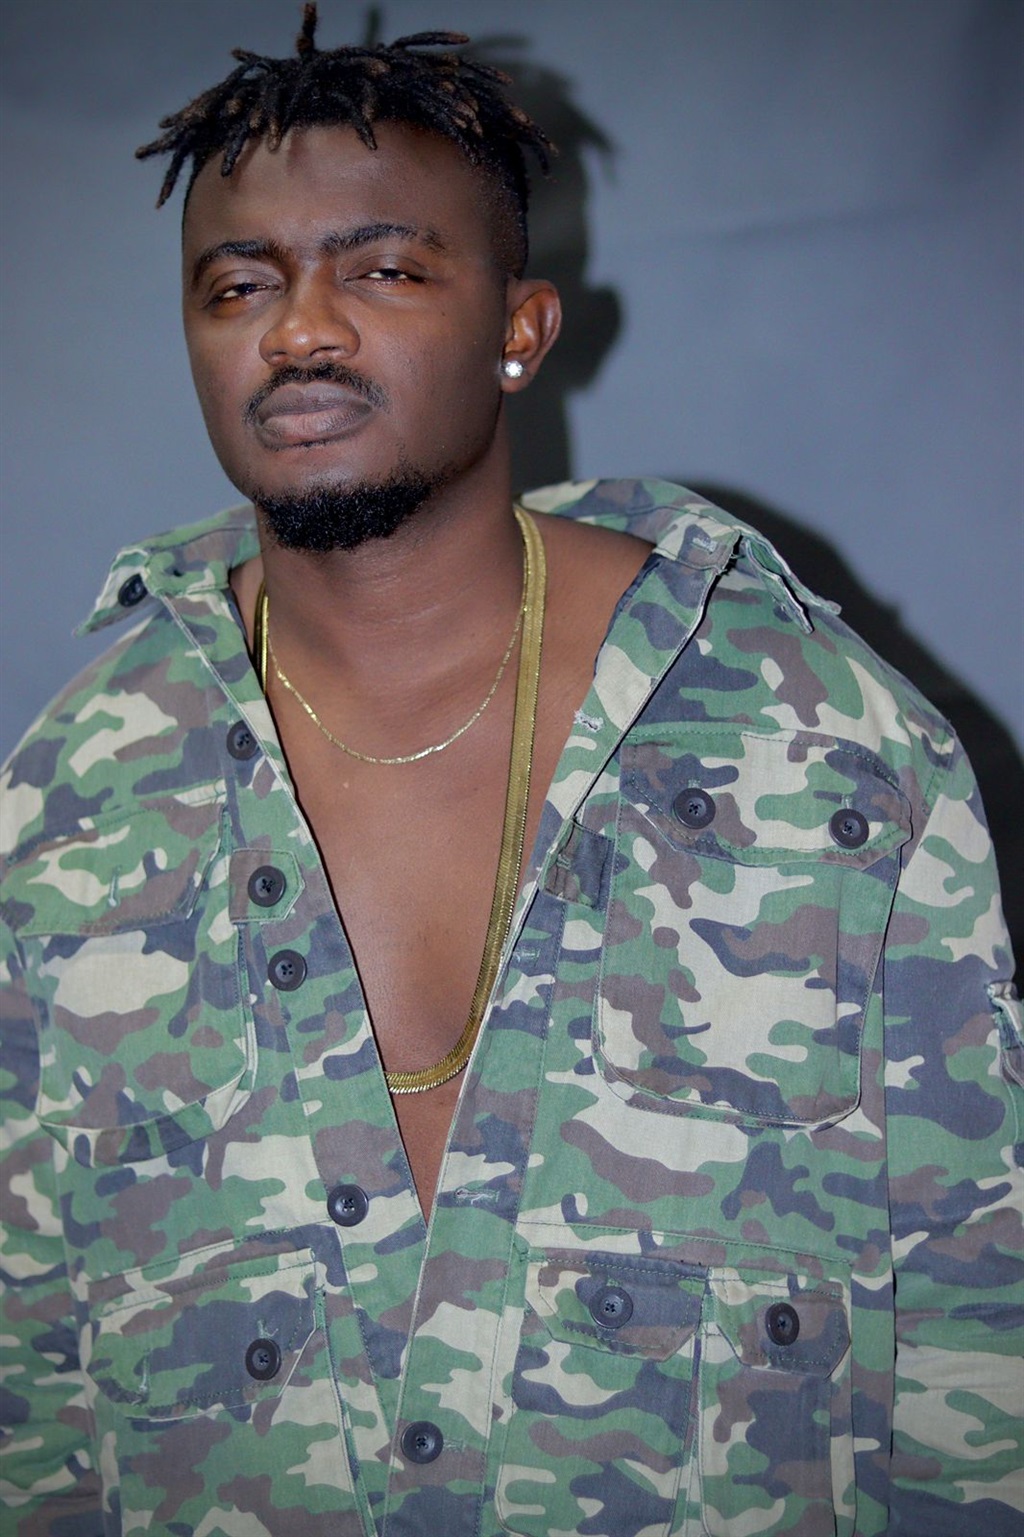 Nigerian artist Promise said SA musicians are hard workers.  